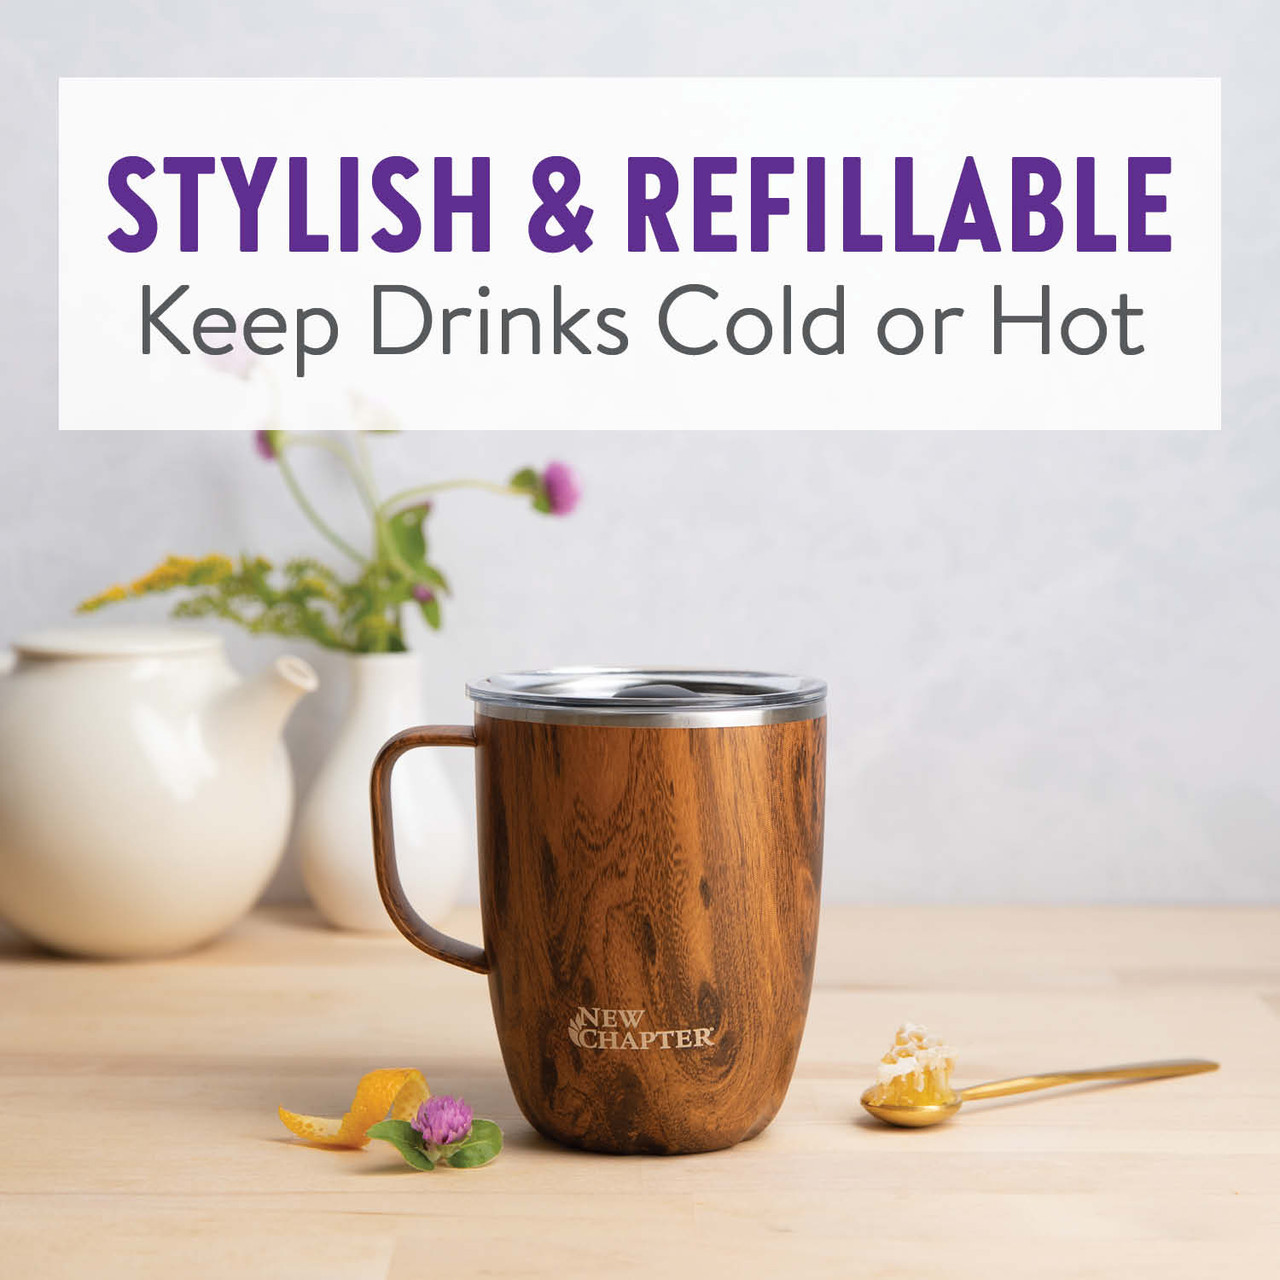 S'well Stainless Steel Travel Mug with Handle - Teakwood - Triple-Layered  Vacuum-Insulated Container